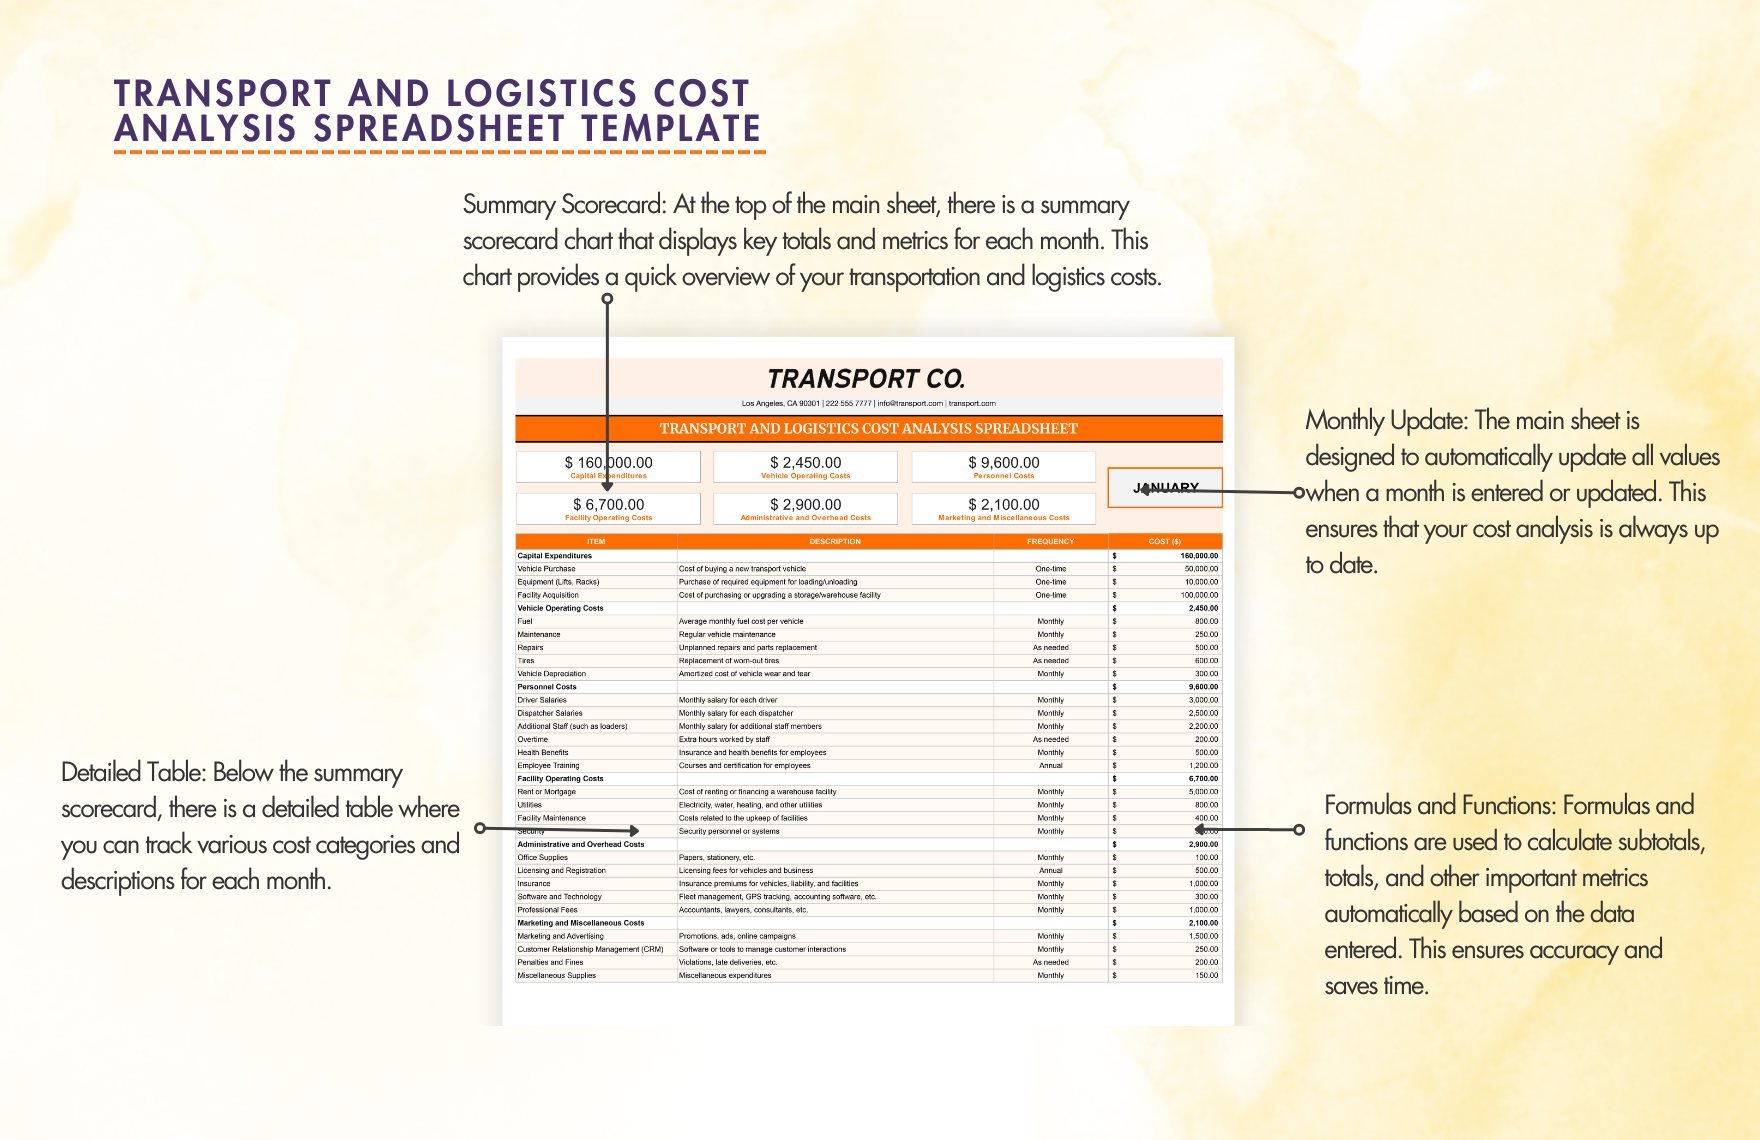 Transport and Logistics Cost Analysis Spreadsheet Template